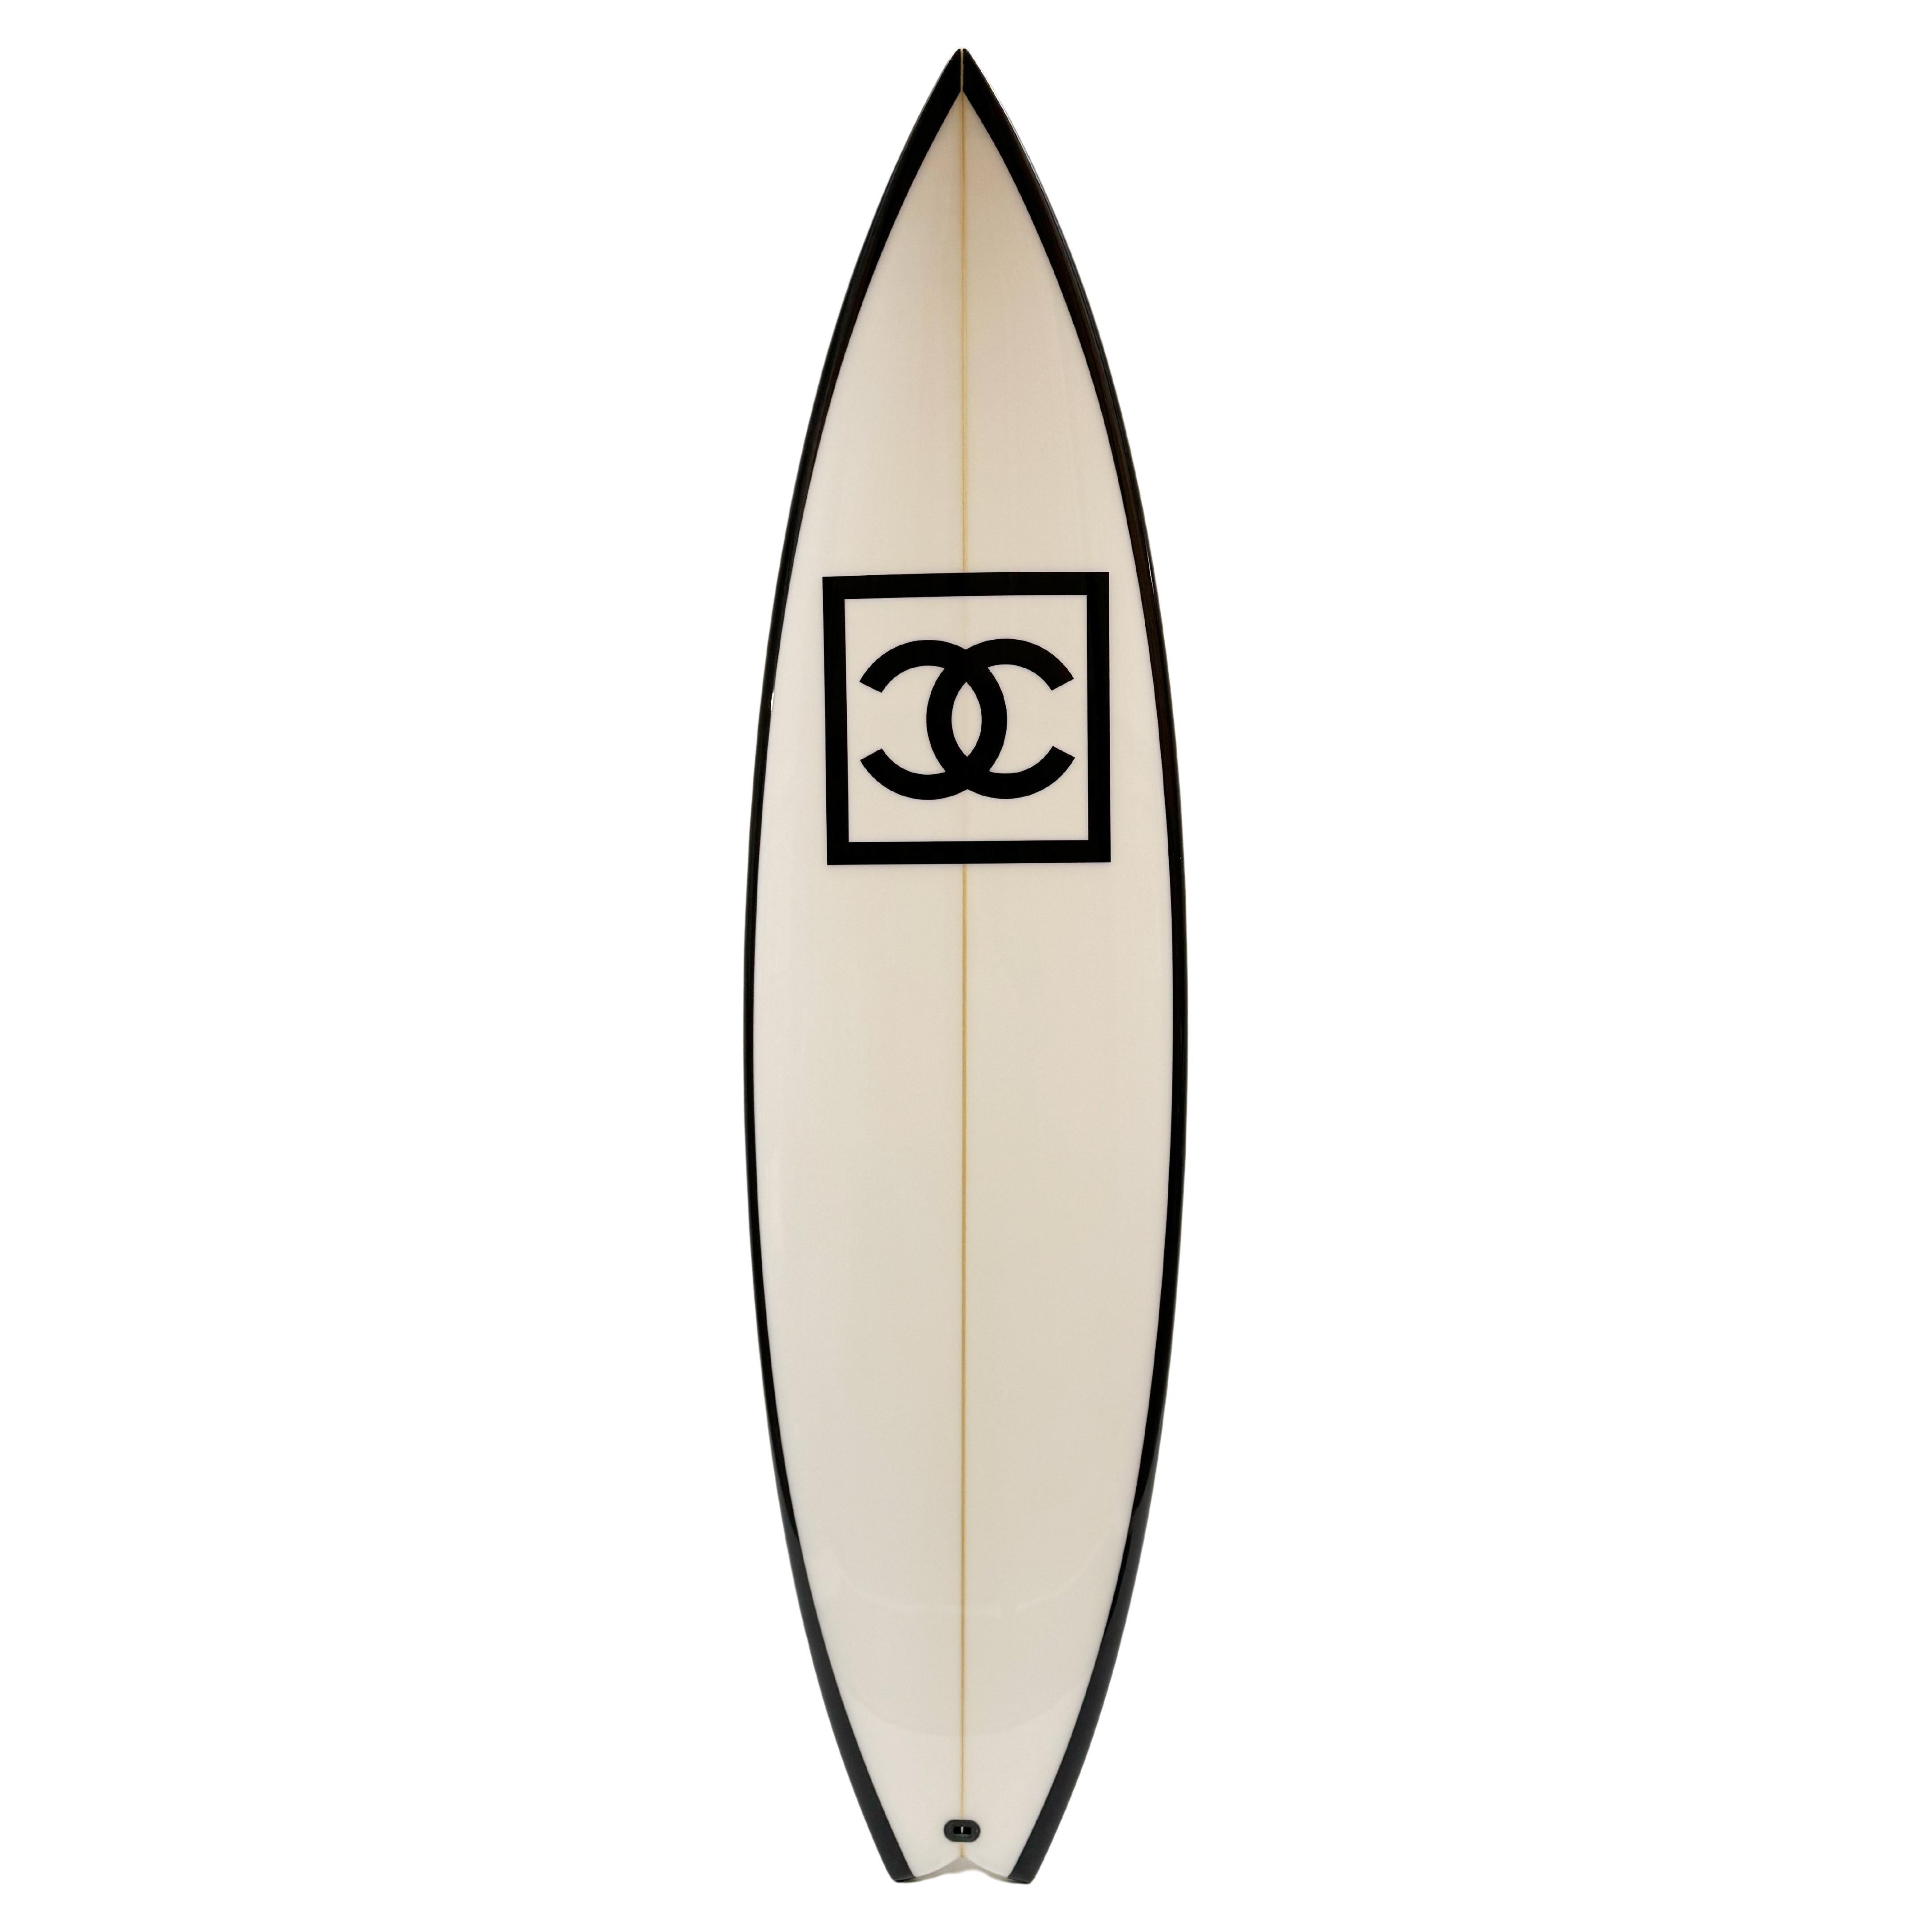 Never used early CHANEL Surfboard 